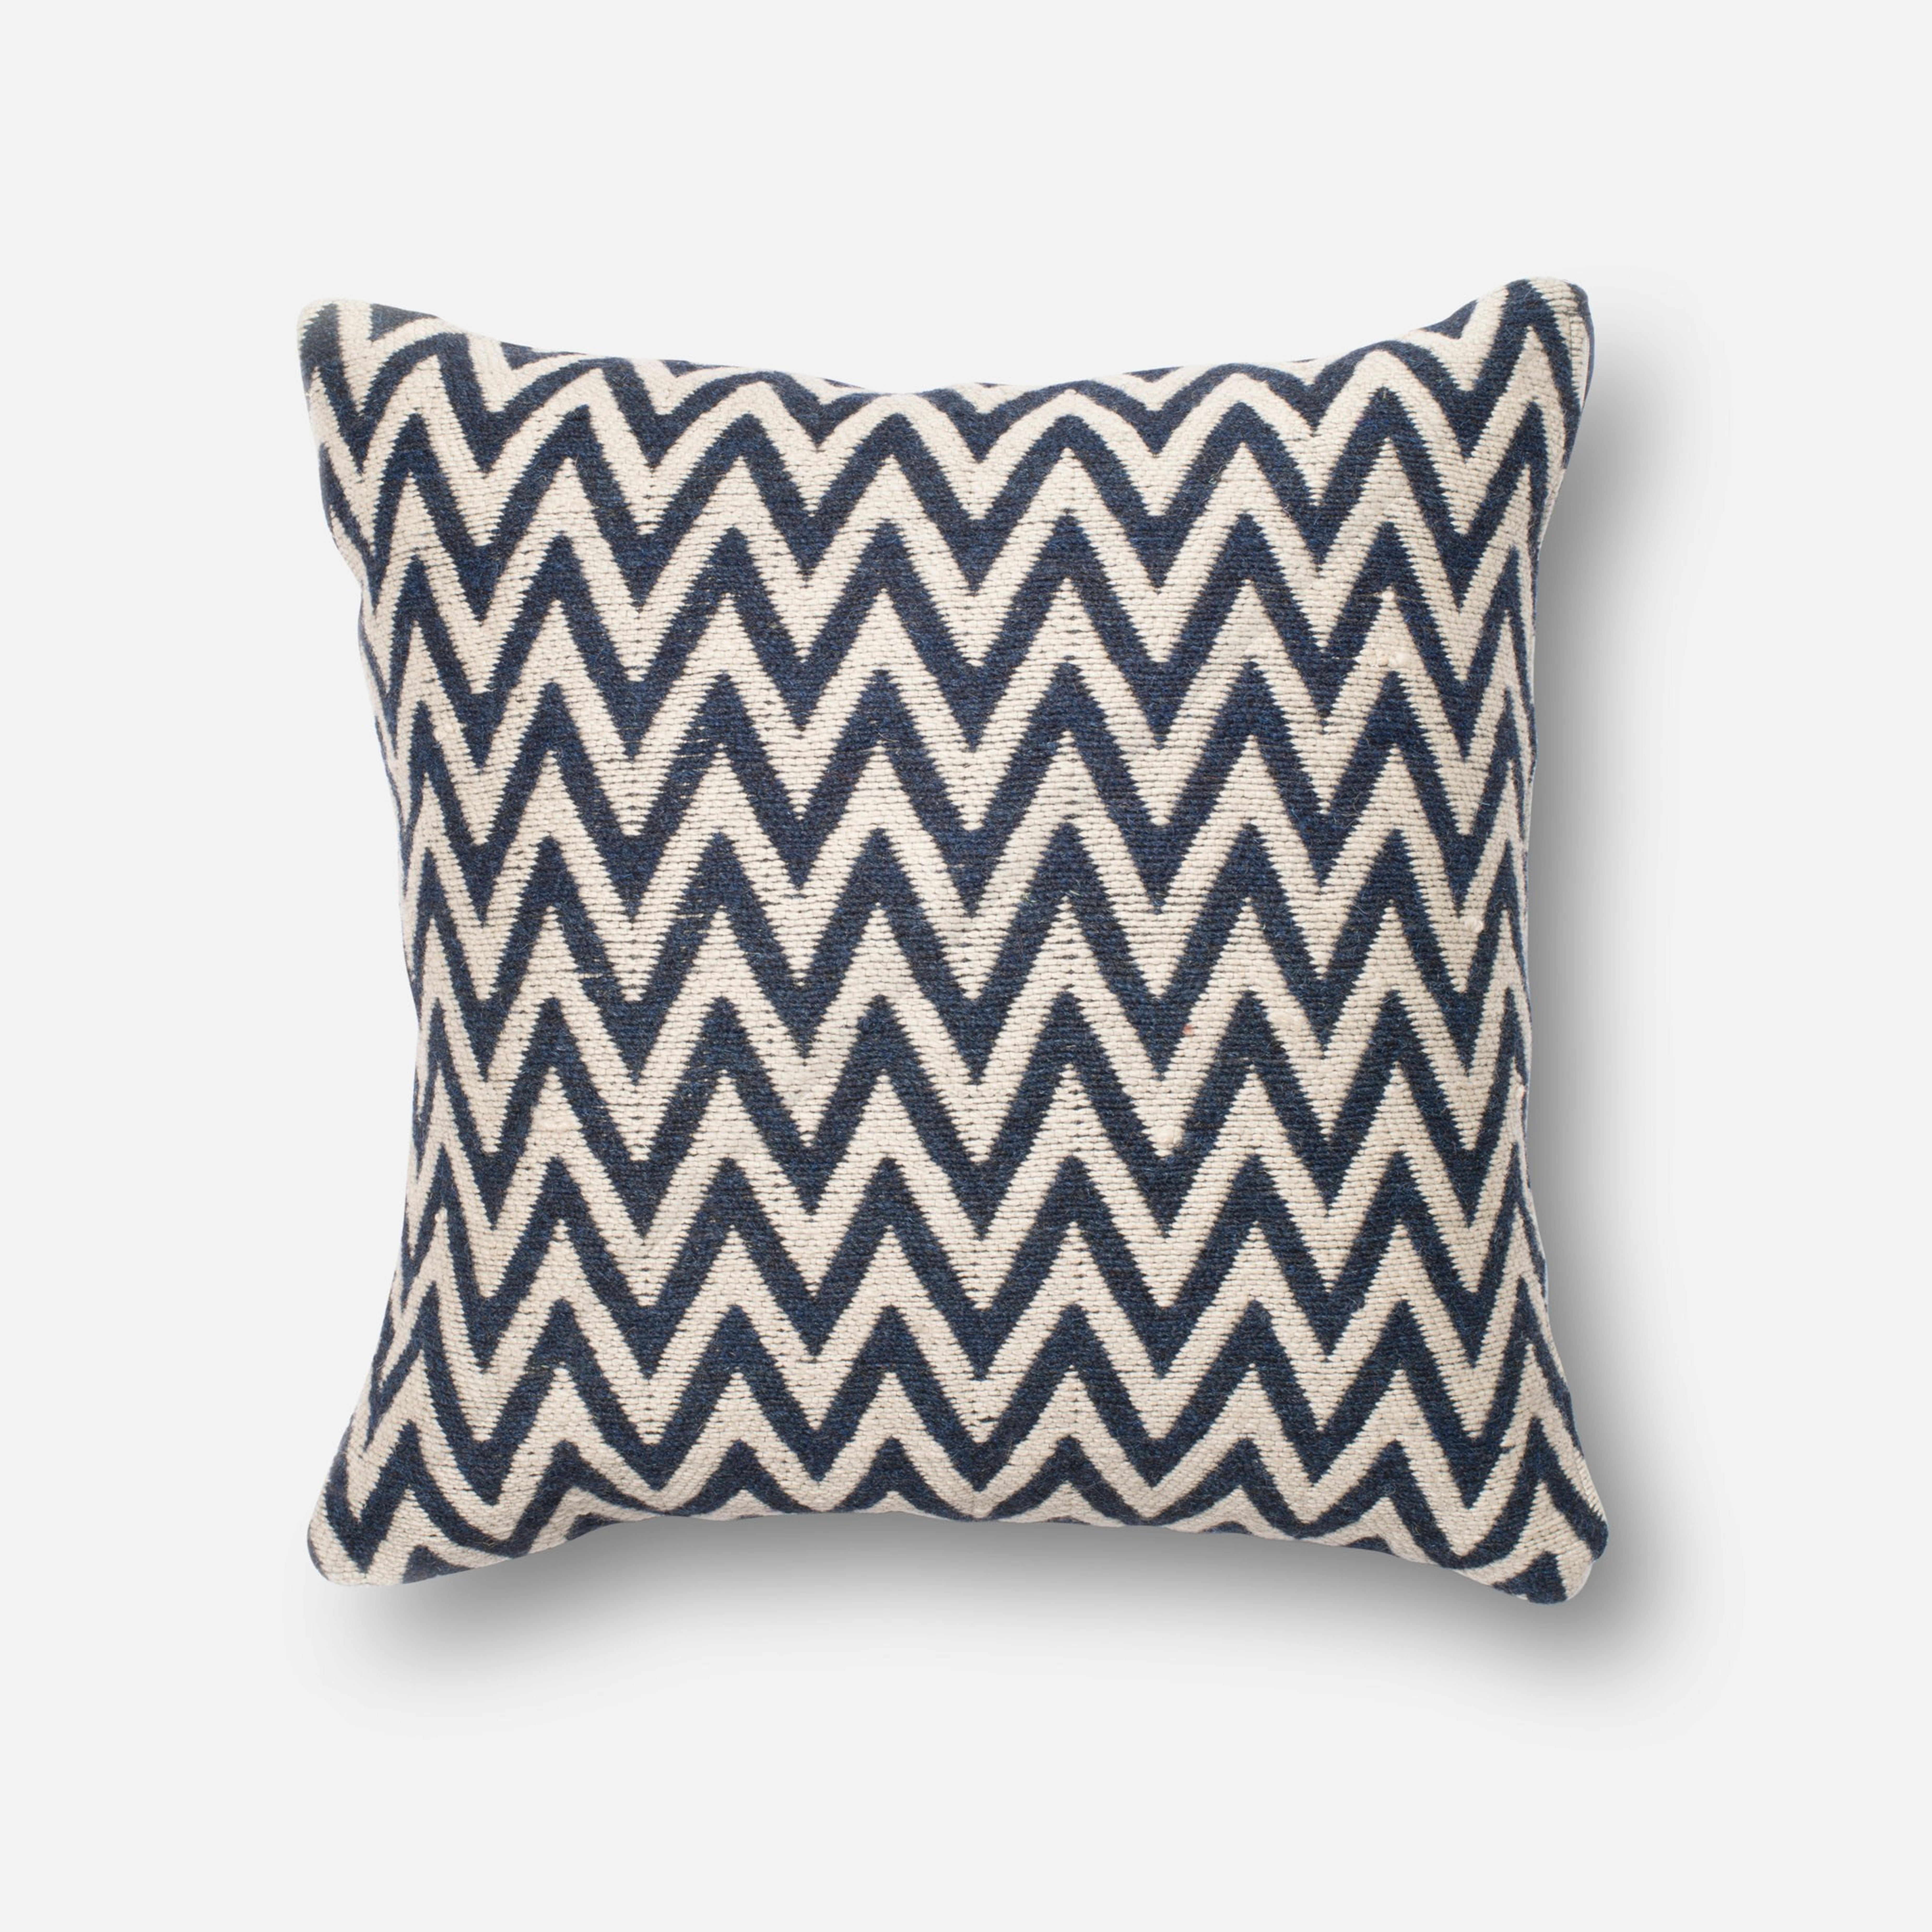 PILLOWS - BEIGE / NAVY - 22" X 22" Cover w/Down - Loloi II